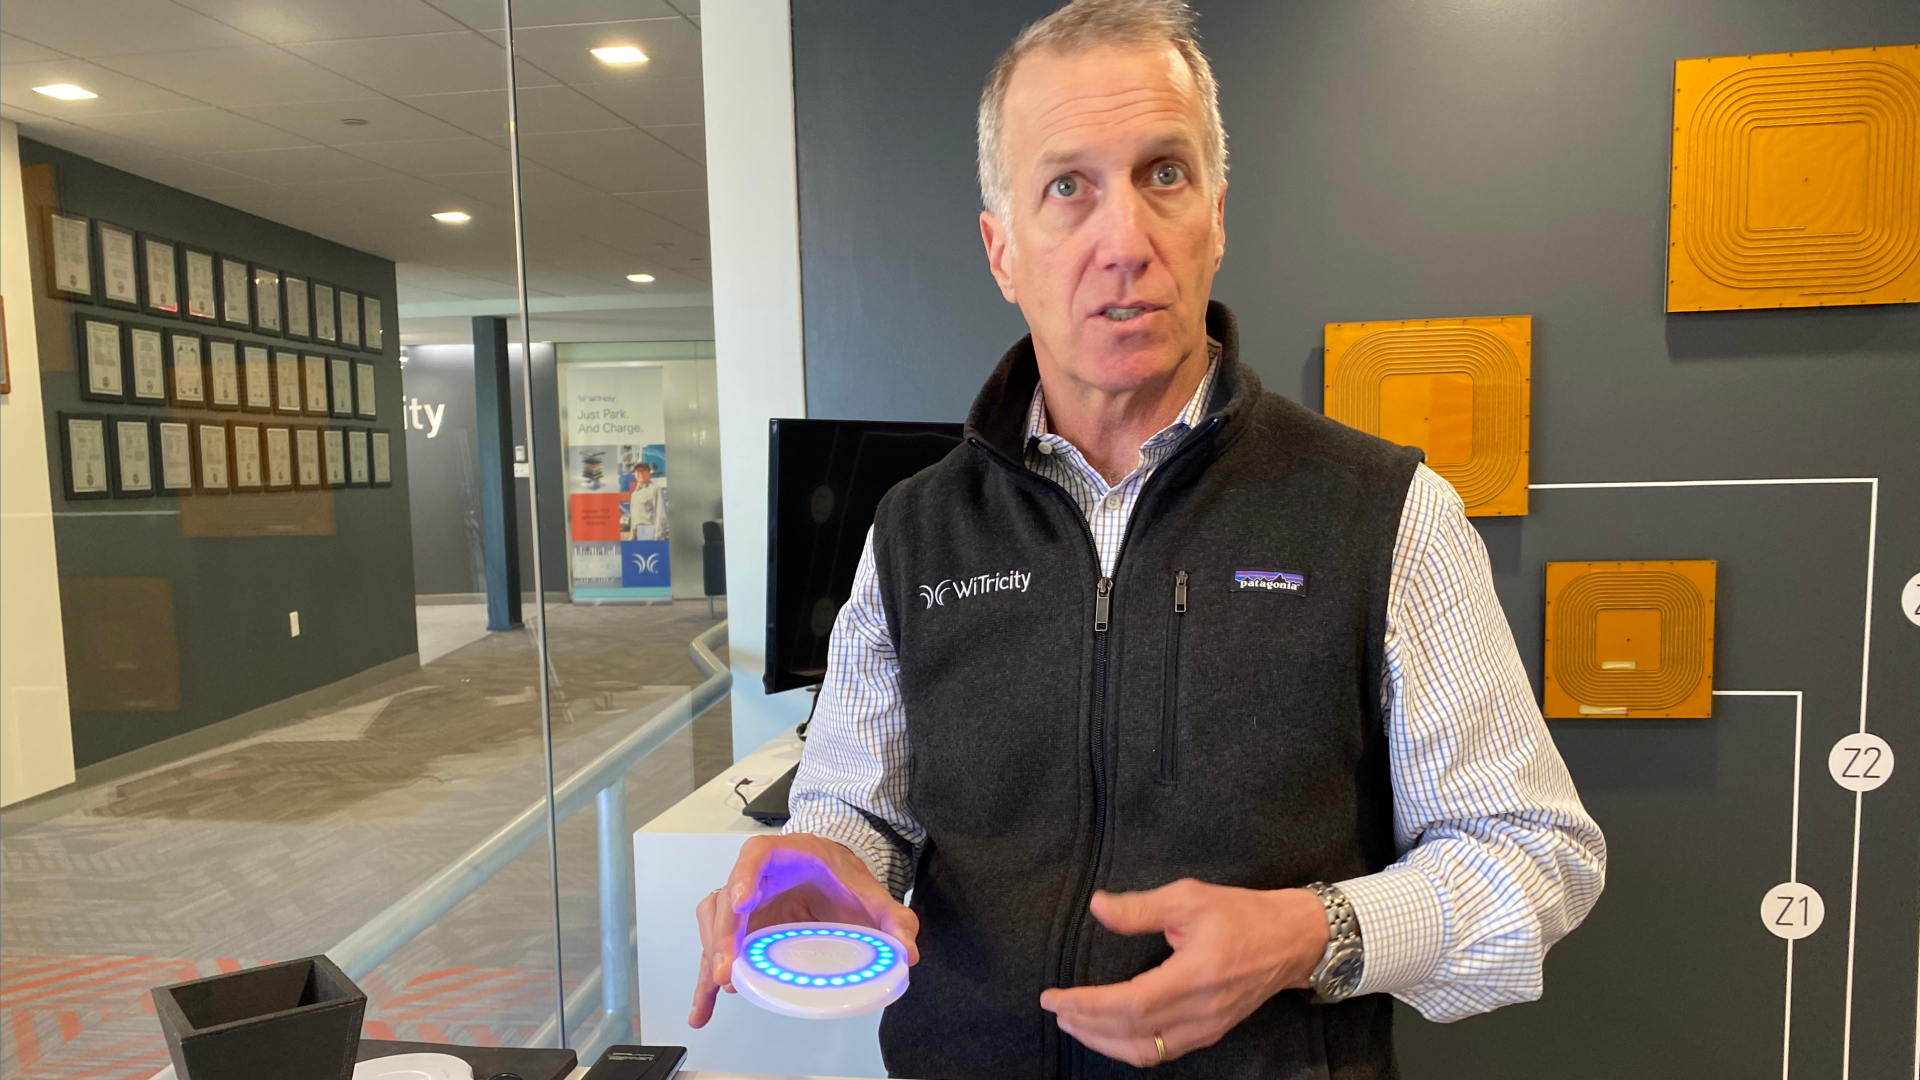 WiTricity CEO holds a light-up blue disk that helps demonstrate the company's wireless charging product.